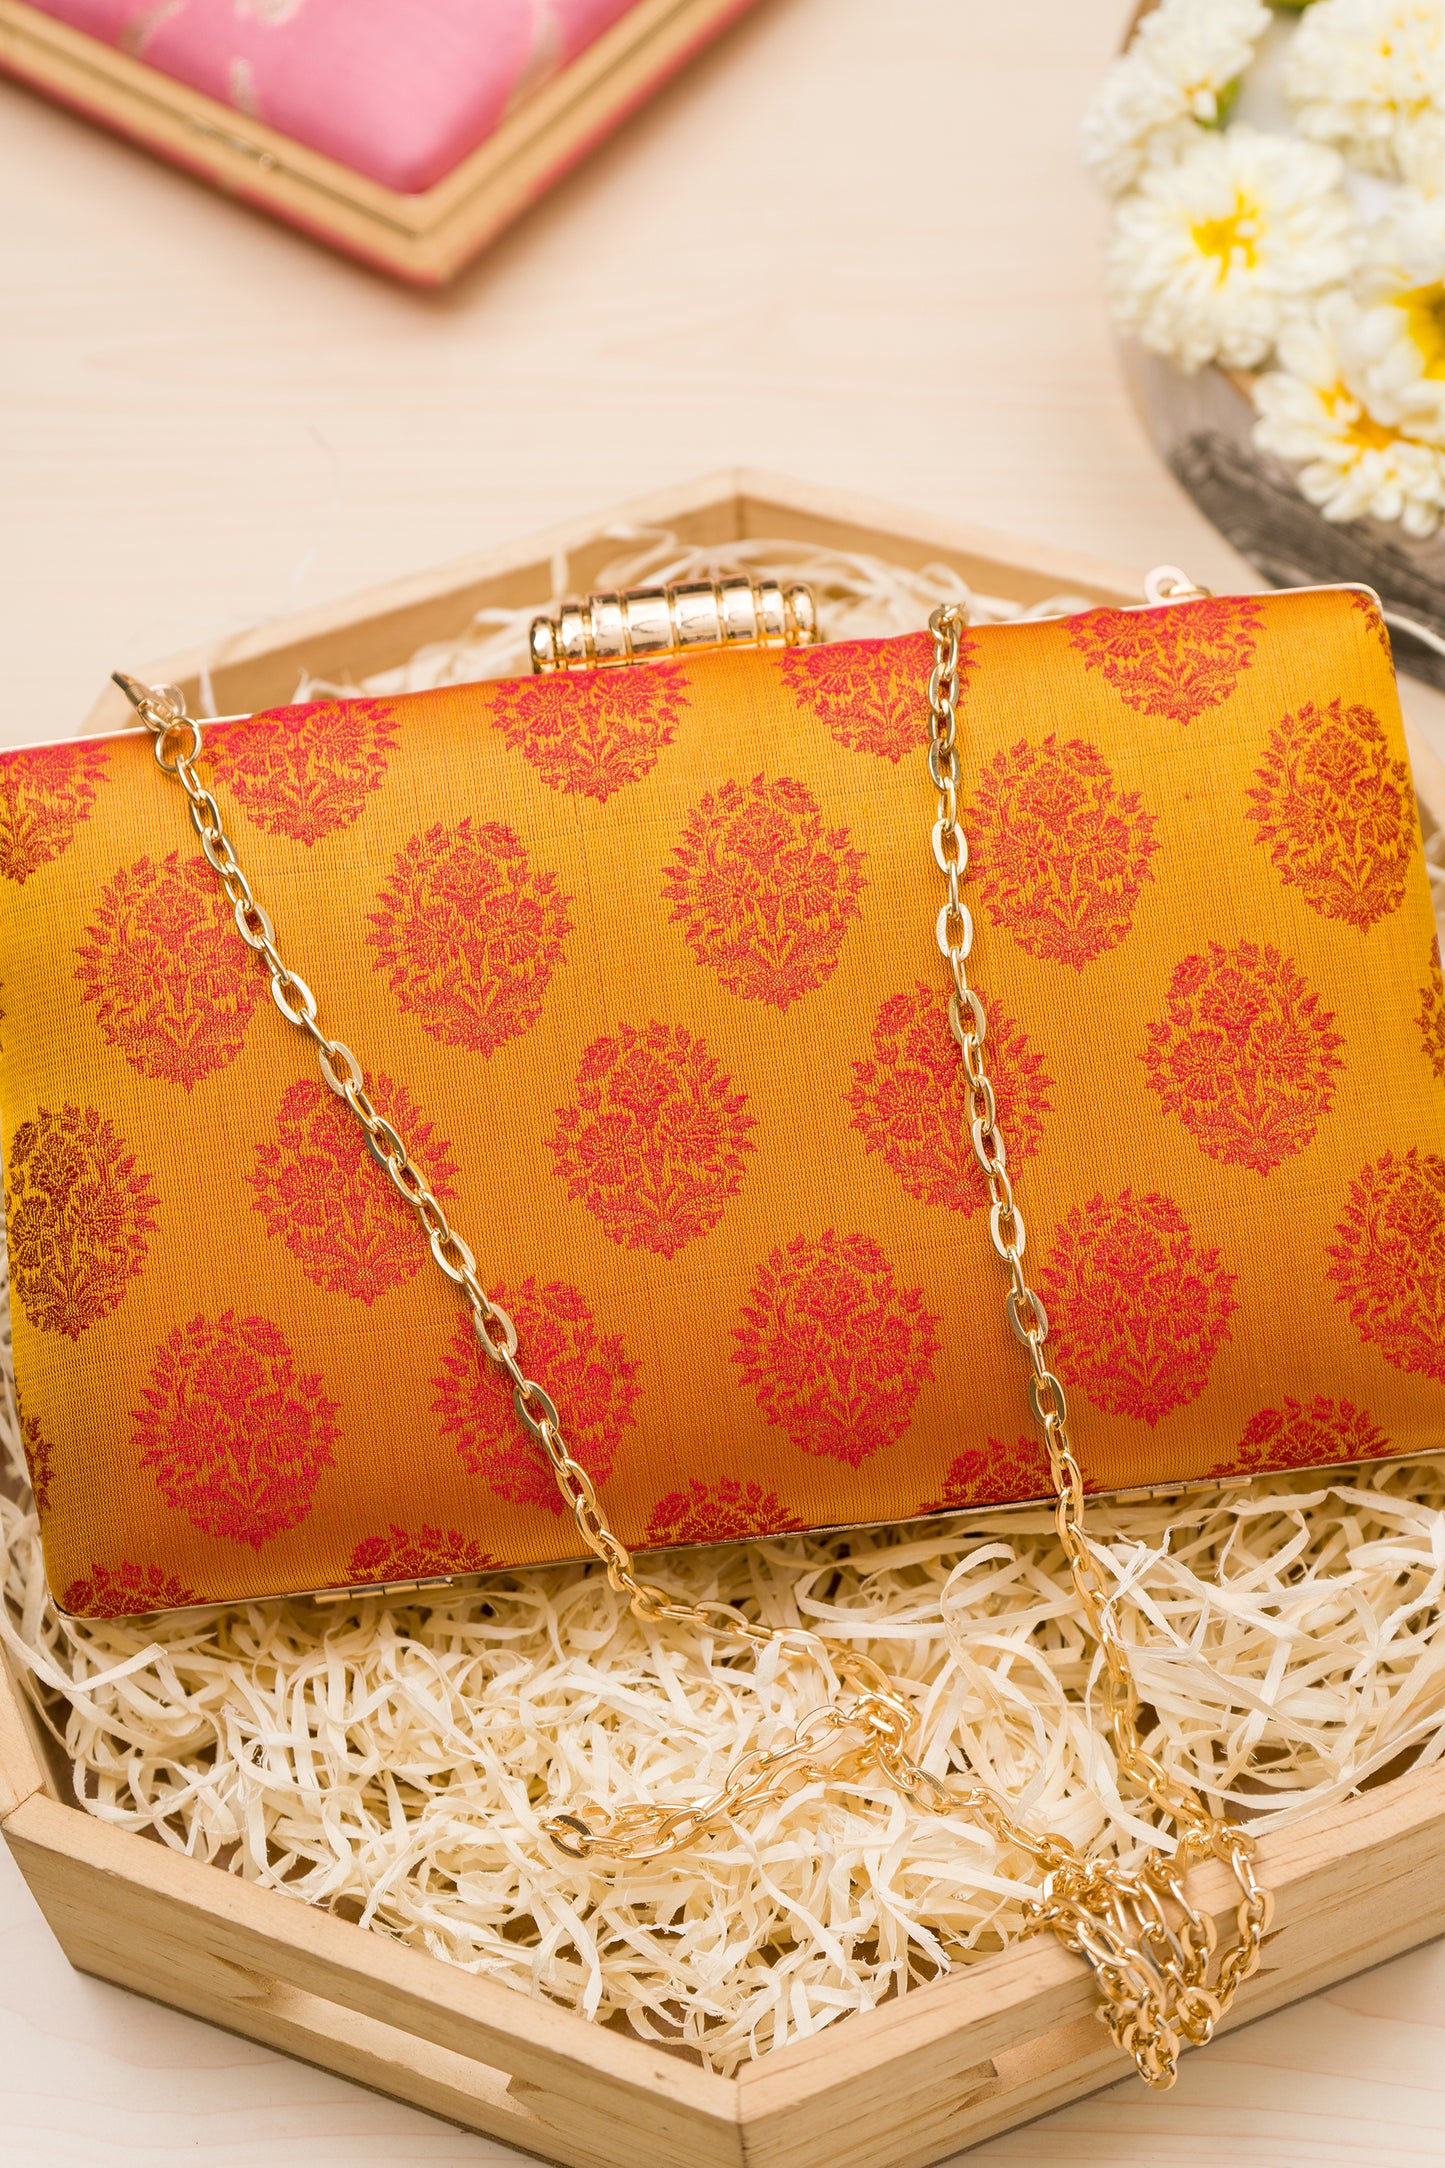 Dhoop Chav Tanchoi Yellow Red Clutch